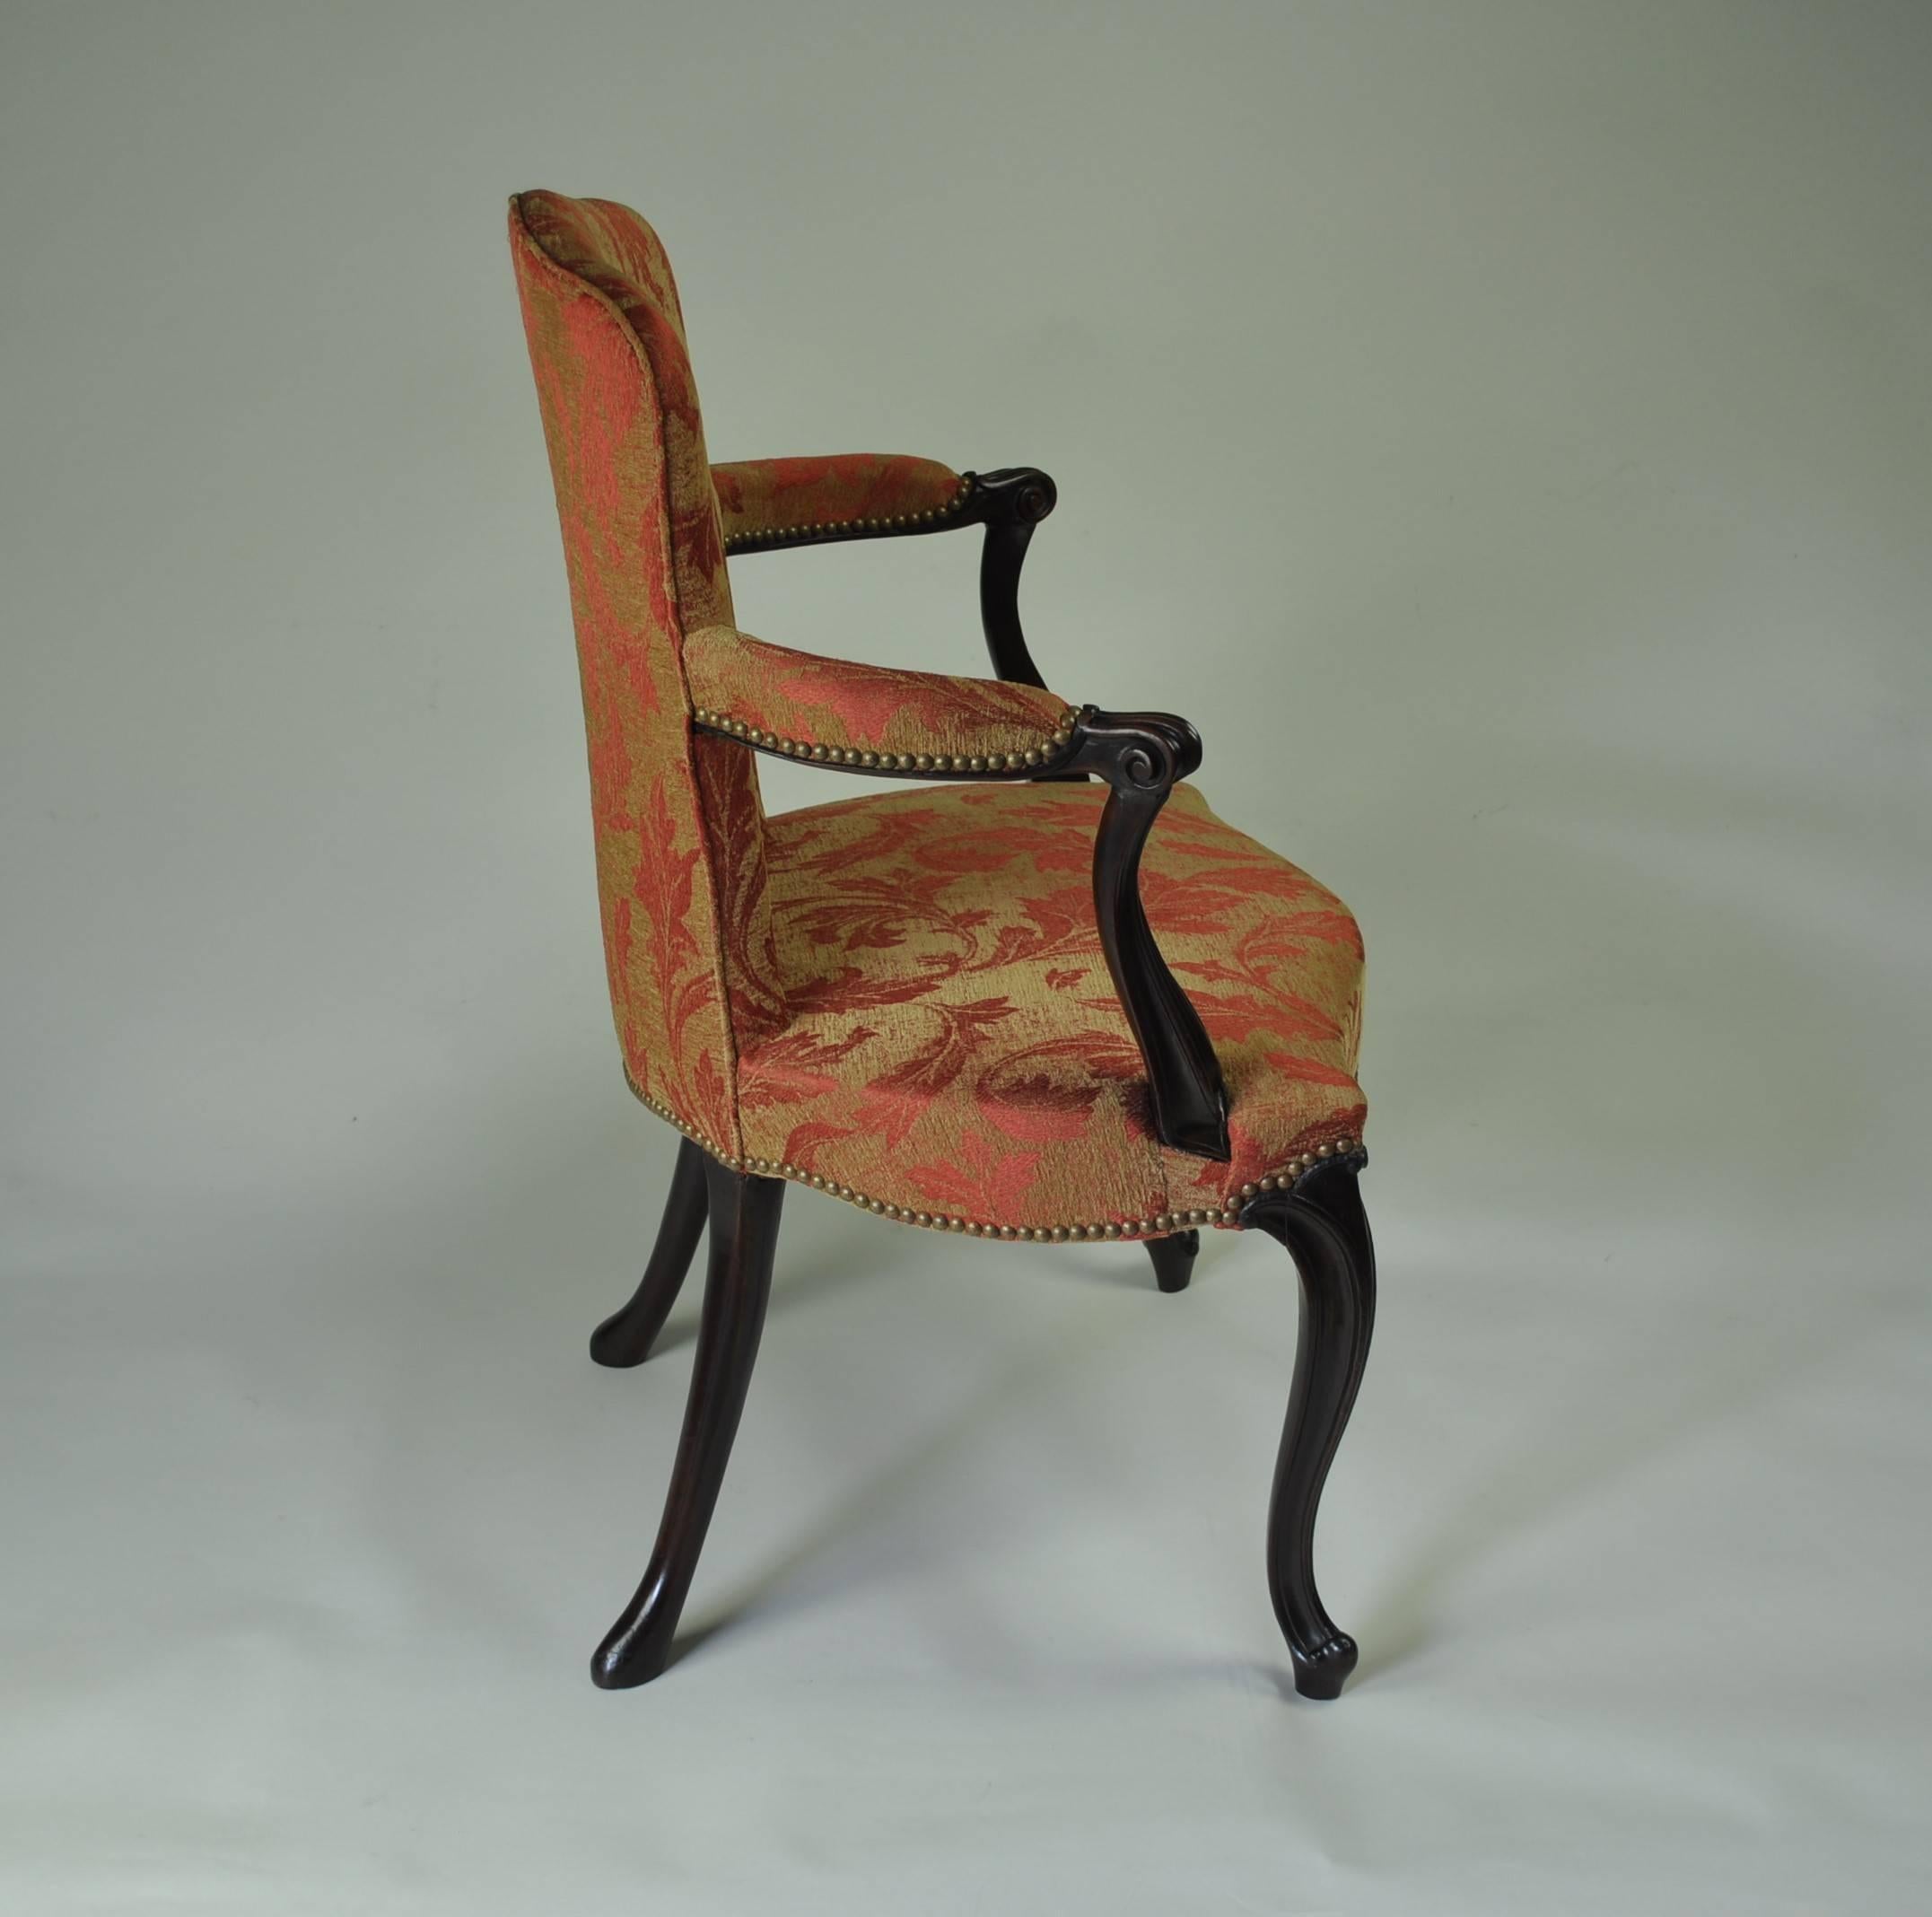 A high quality late 18th century English salon chair of “French Hepplewhite” design, with upholstered back and out-scrolled moulded arms, standing on shaped and moulded cabriole legs and scrolled toes with pad feet at the rear.